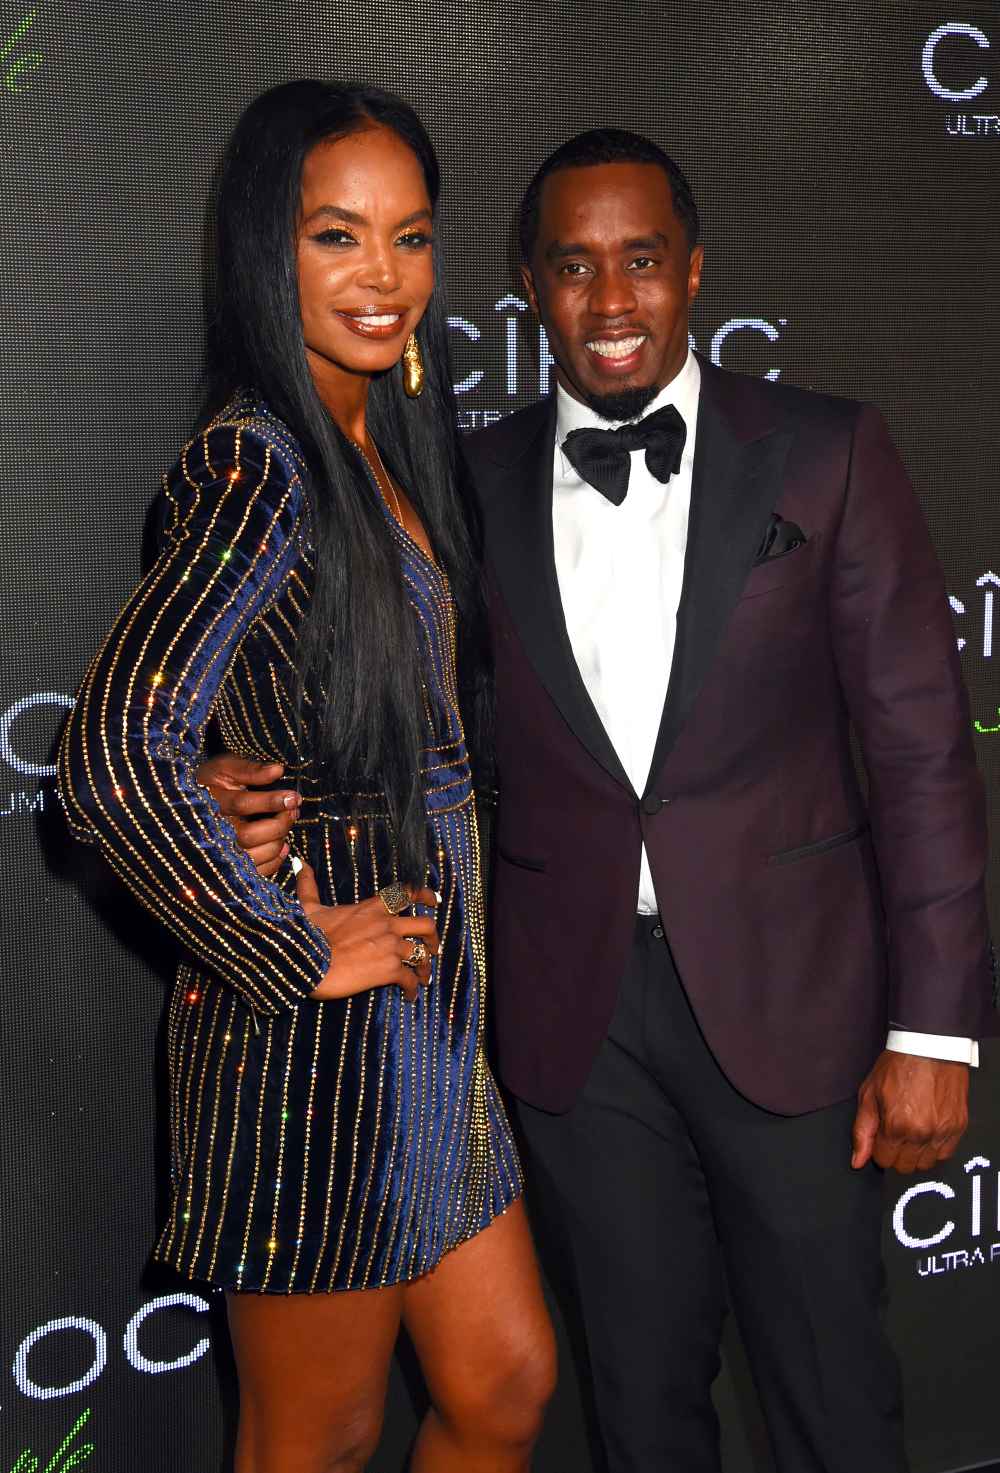 Sean 'P. Diddy' Combs and Kim Porter